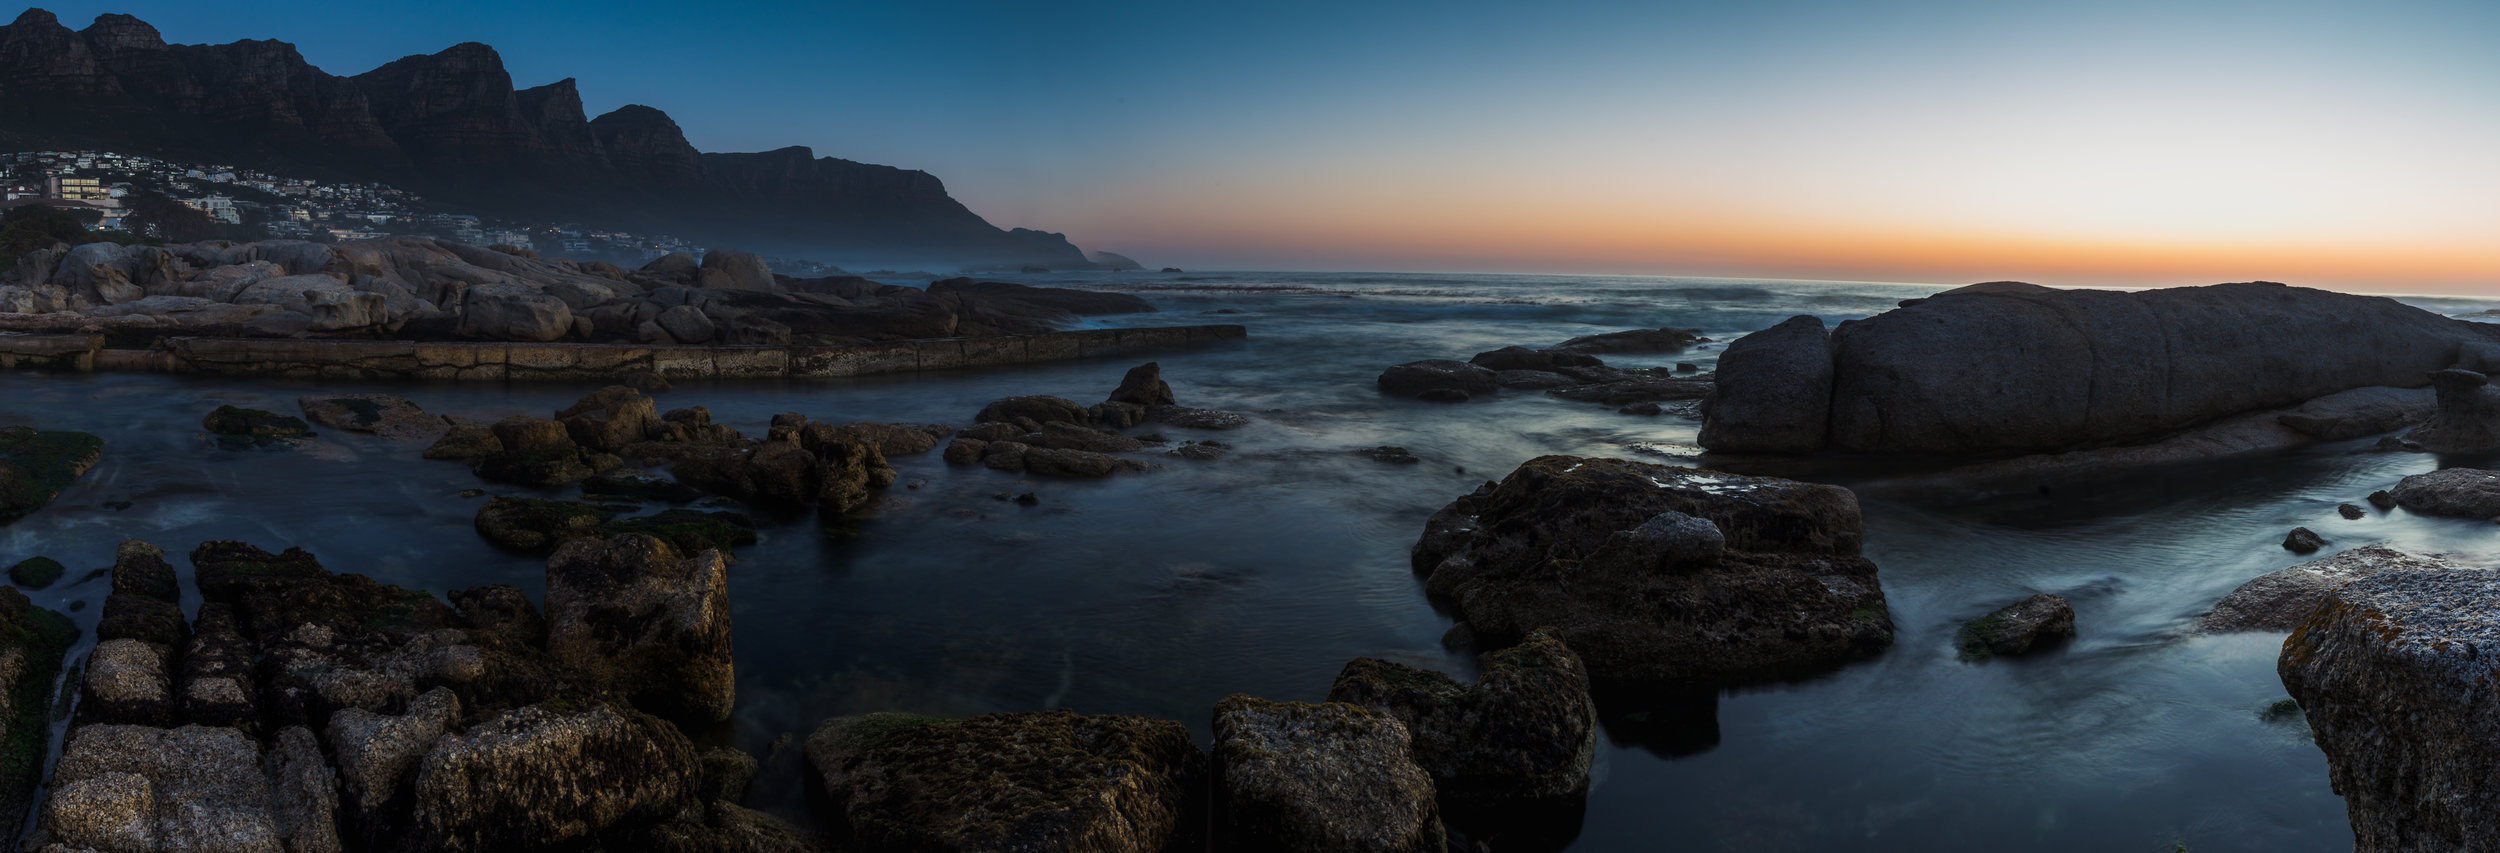 Camps Bay Sunset. Cape Town, South Africa (Aug. 2019)